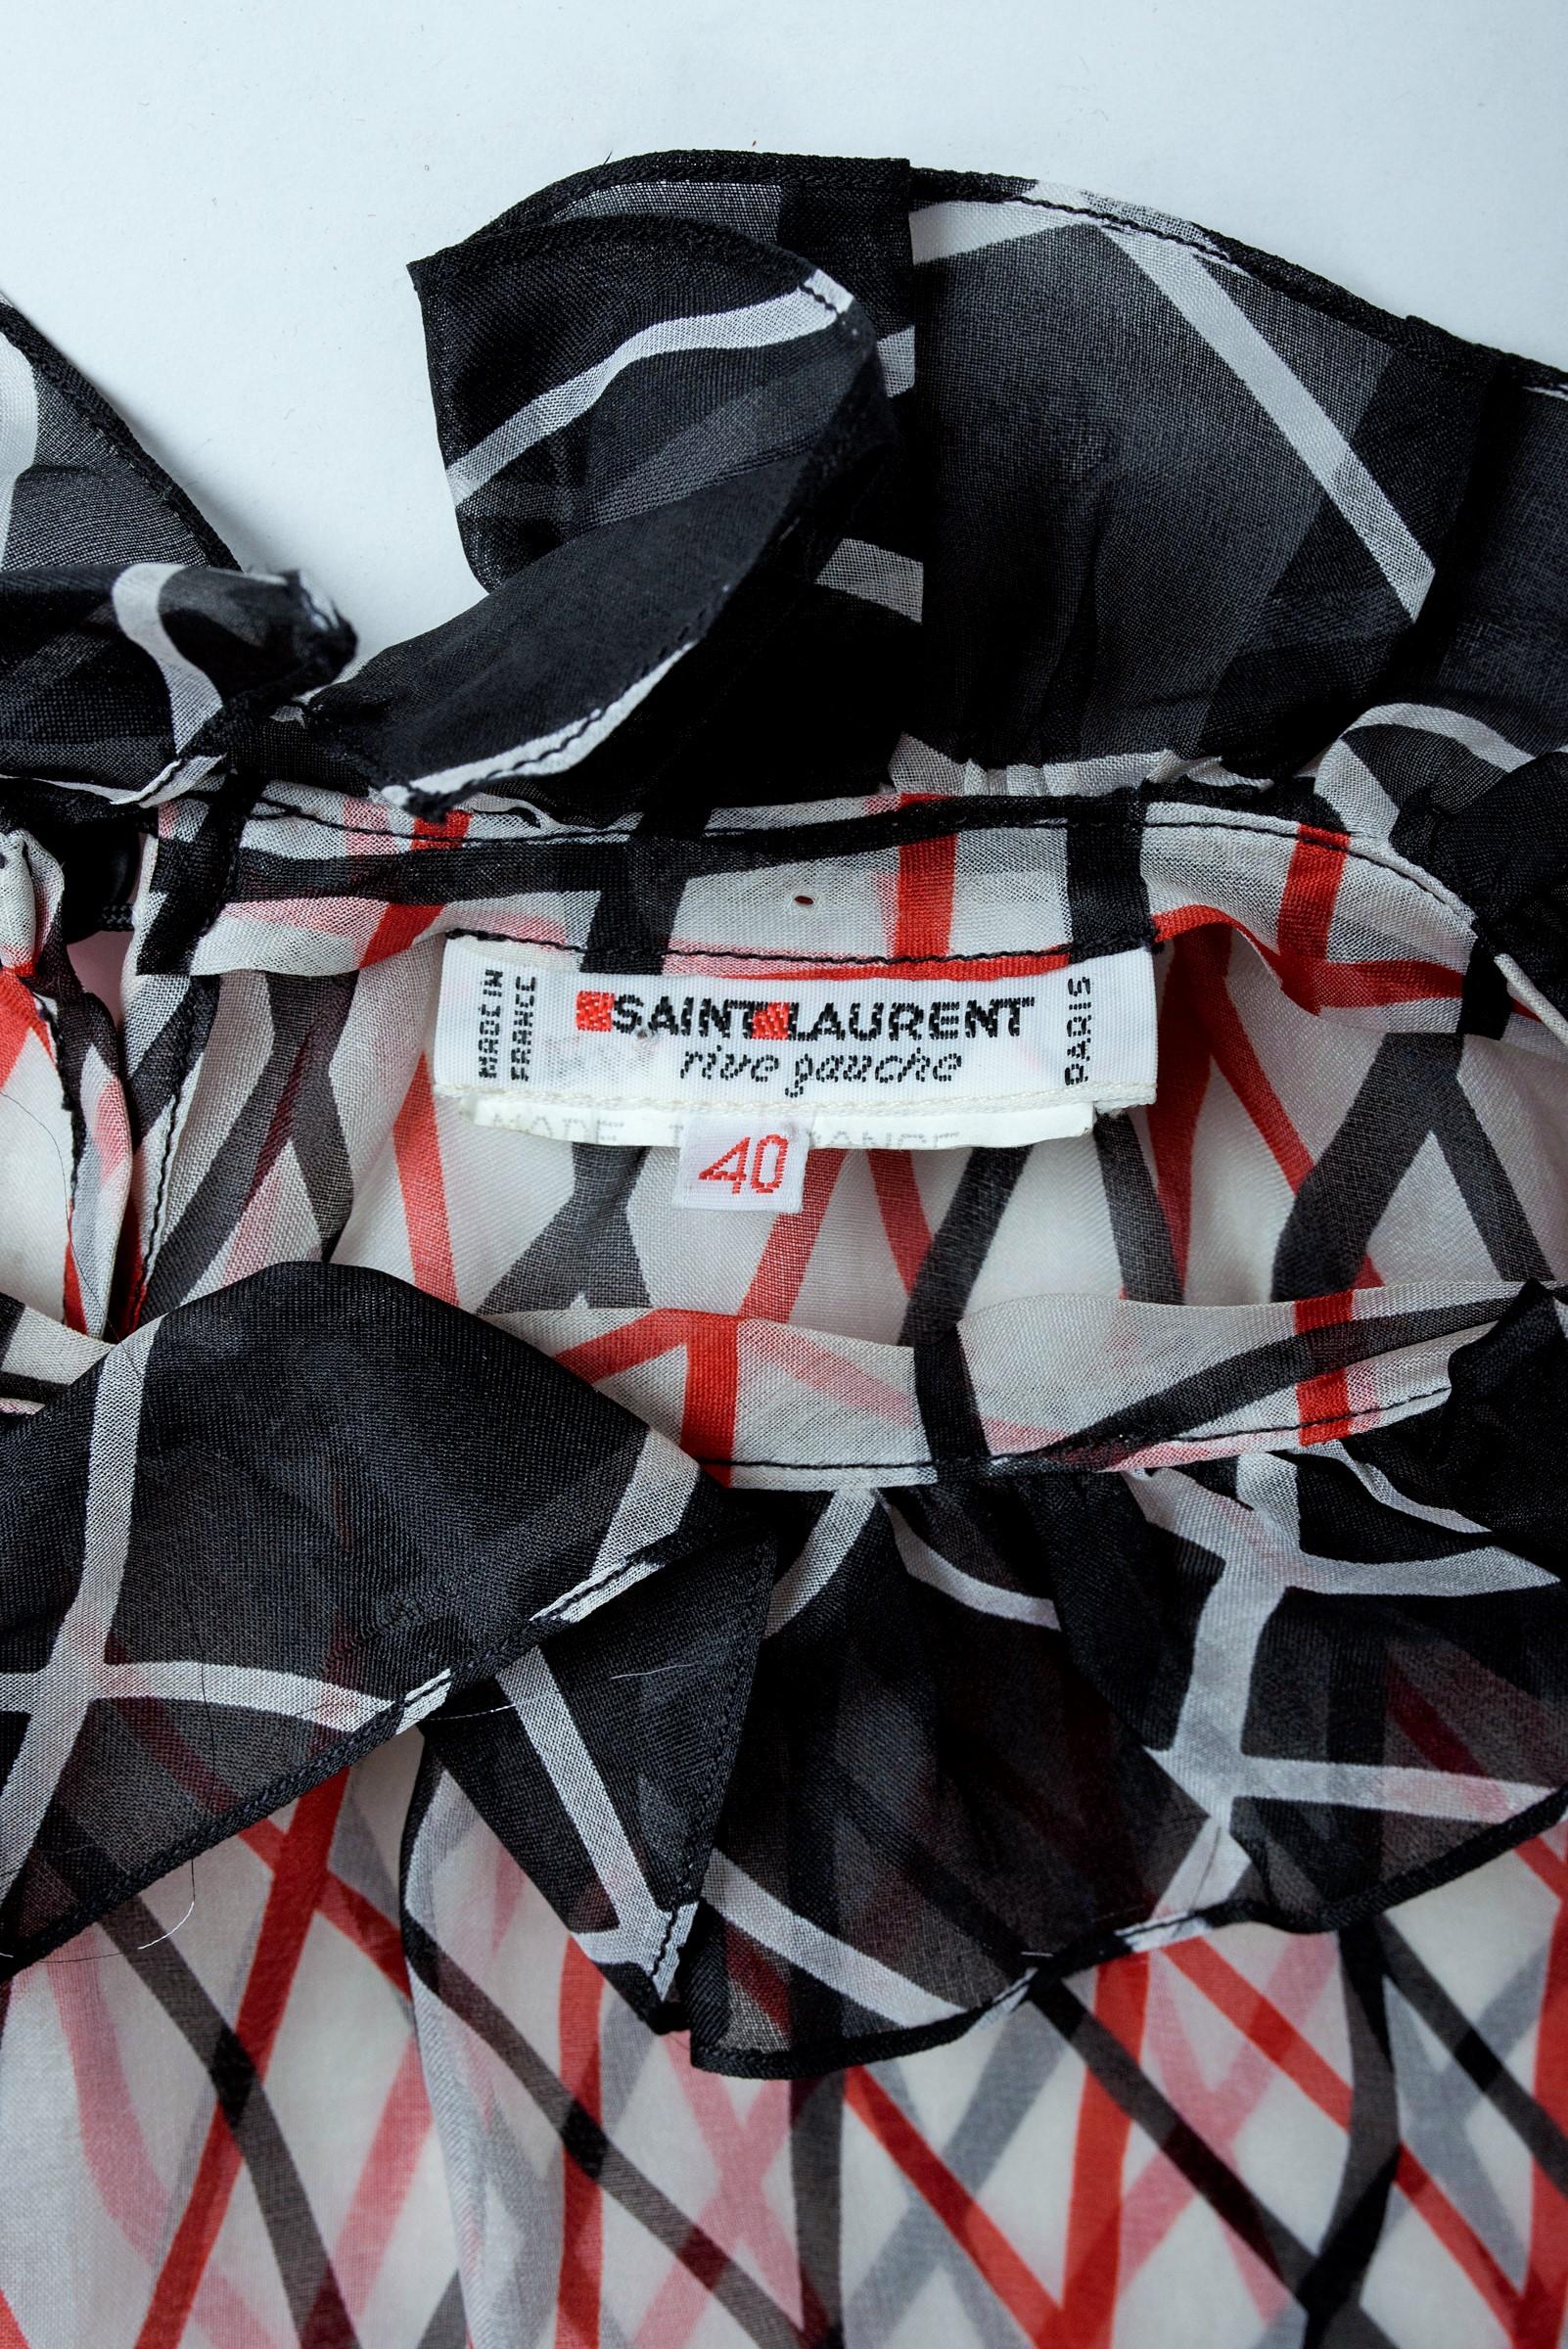 Yves Saint Laurent Printed Chiffon Skirt and Shawl Blouse - Spring Summer 1980 In Good Condition For Sale In Toulon, FR